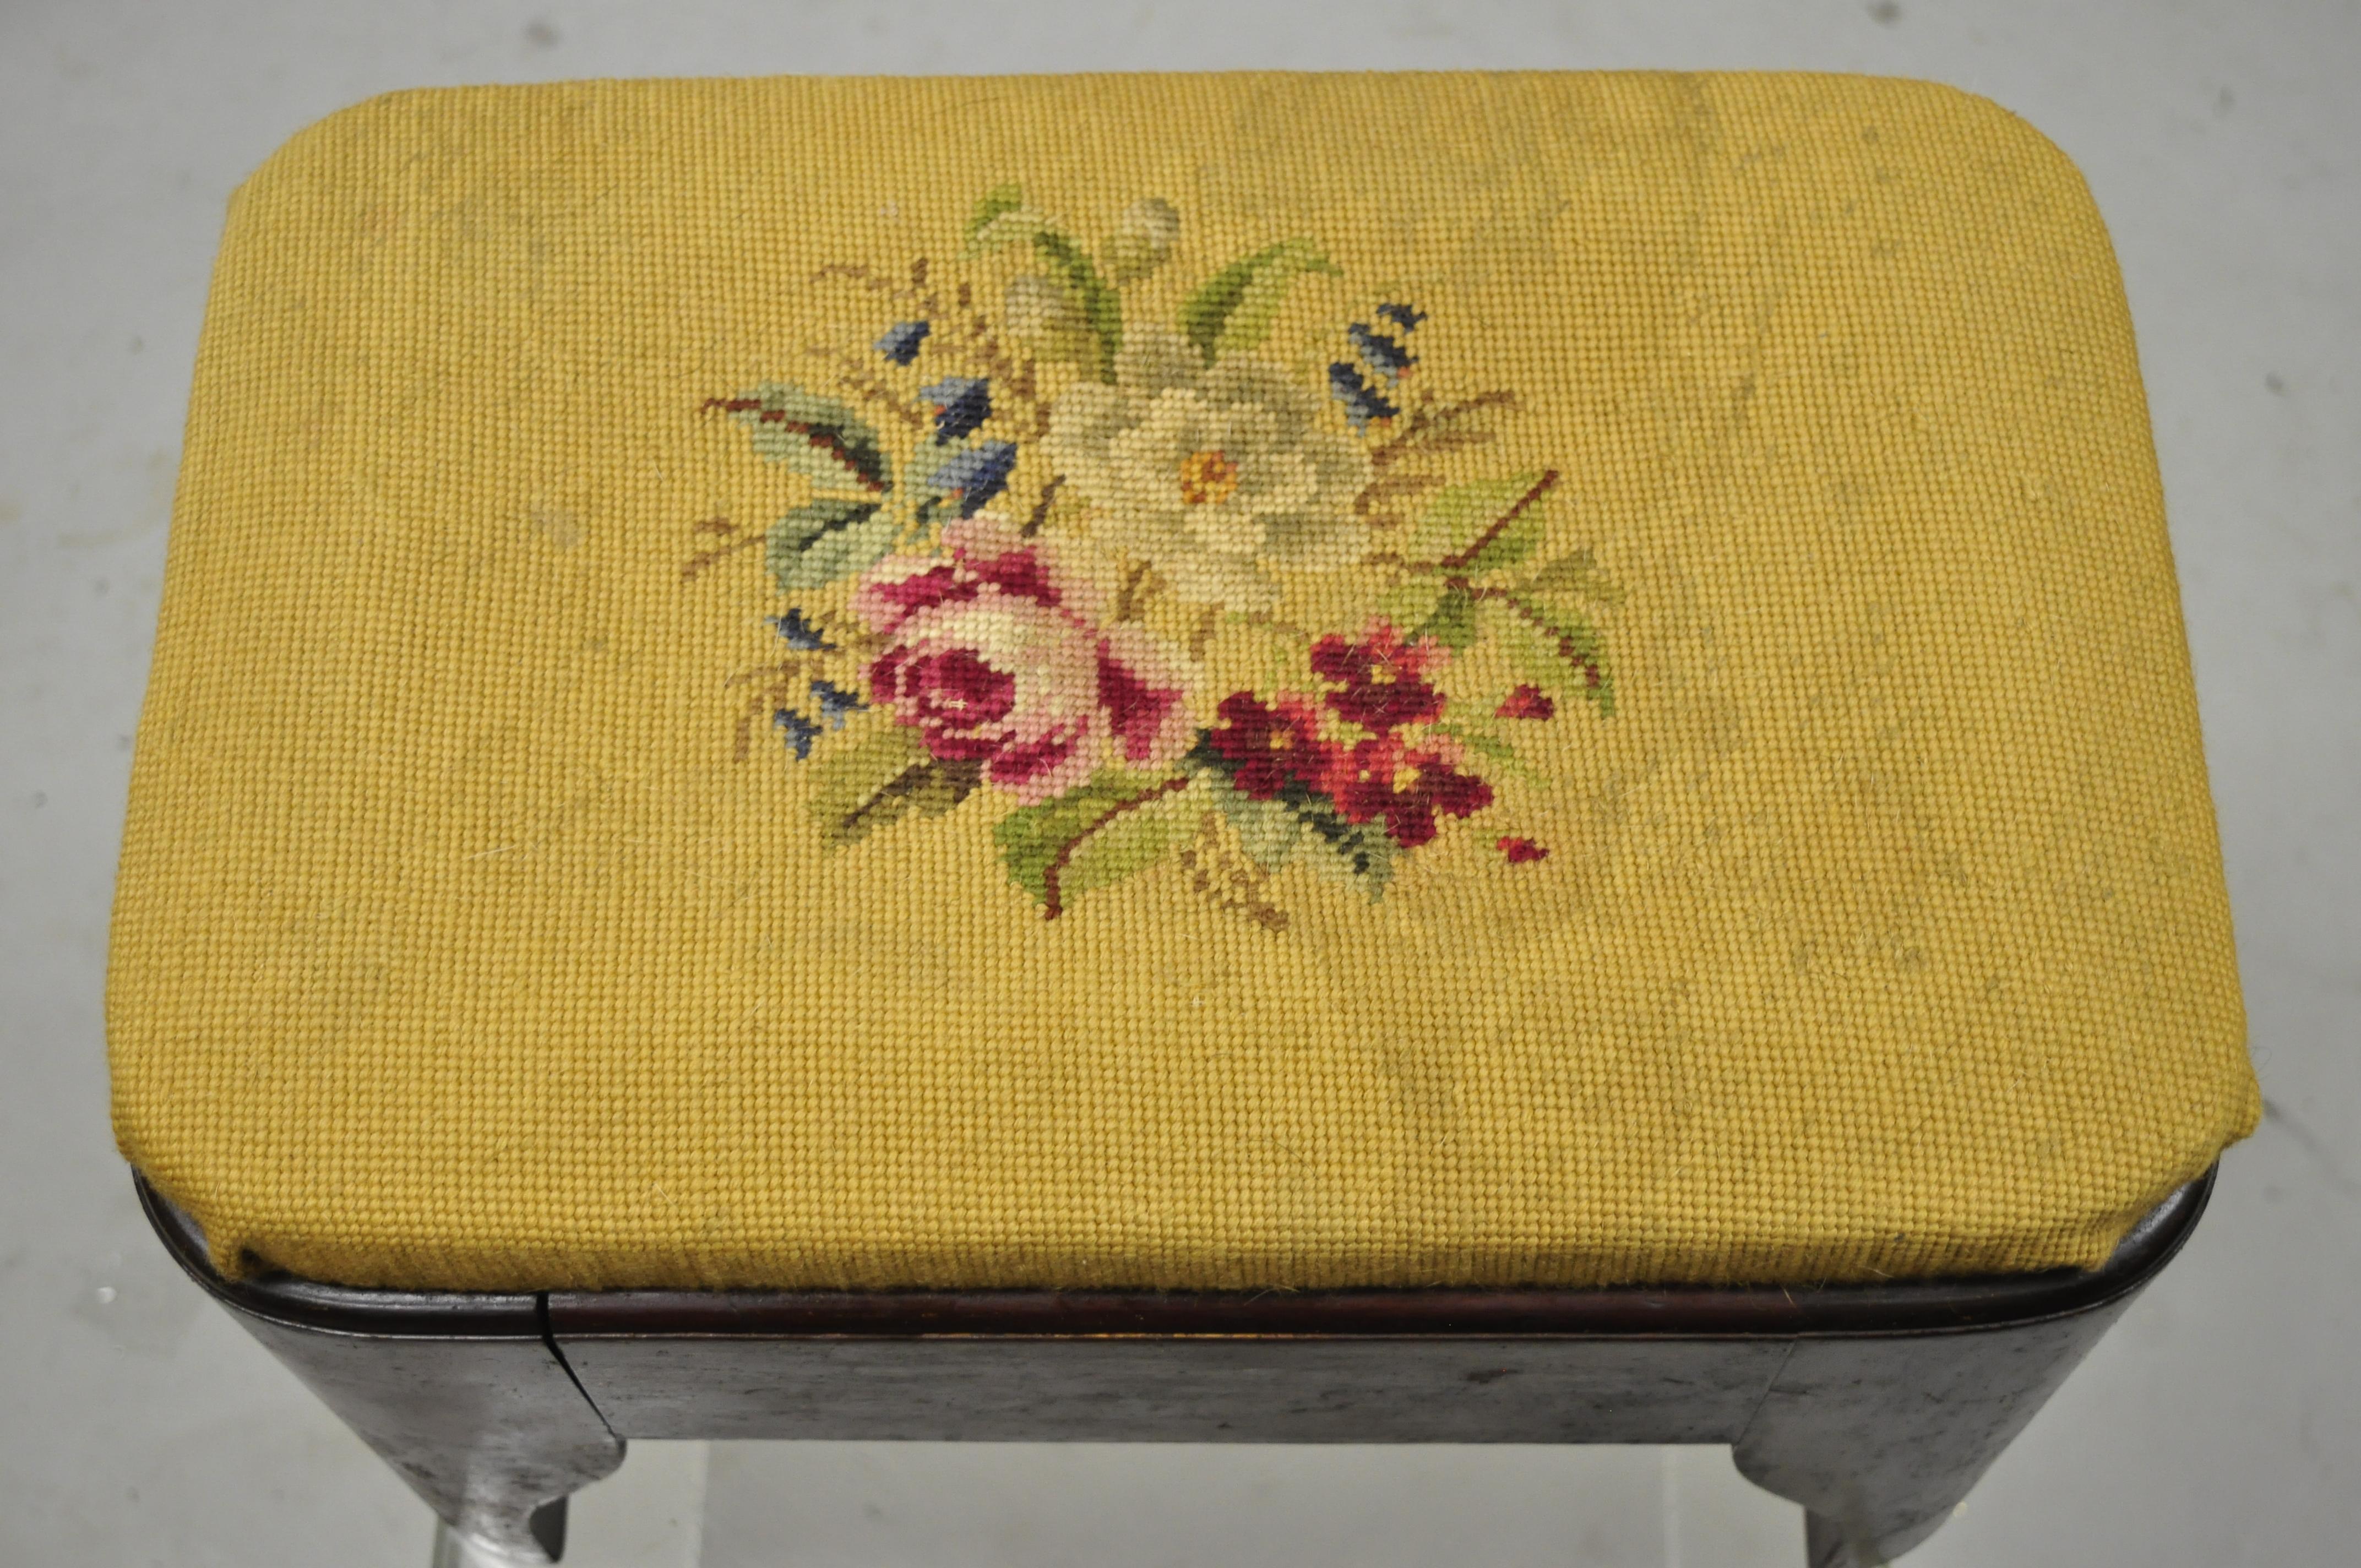 Fabric Antique Victorian Empire Crotch Mahogany Floral Needlepoint Footstool Ottoman